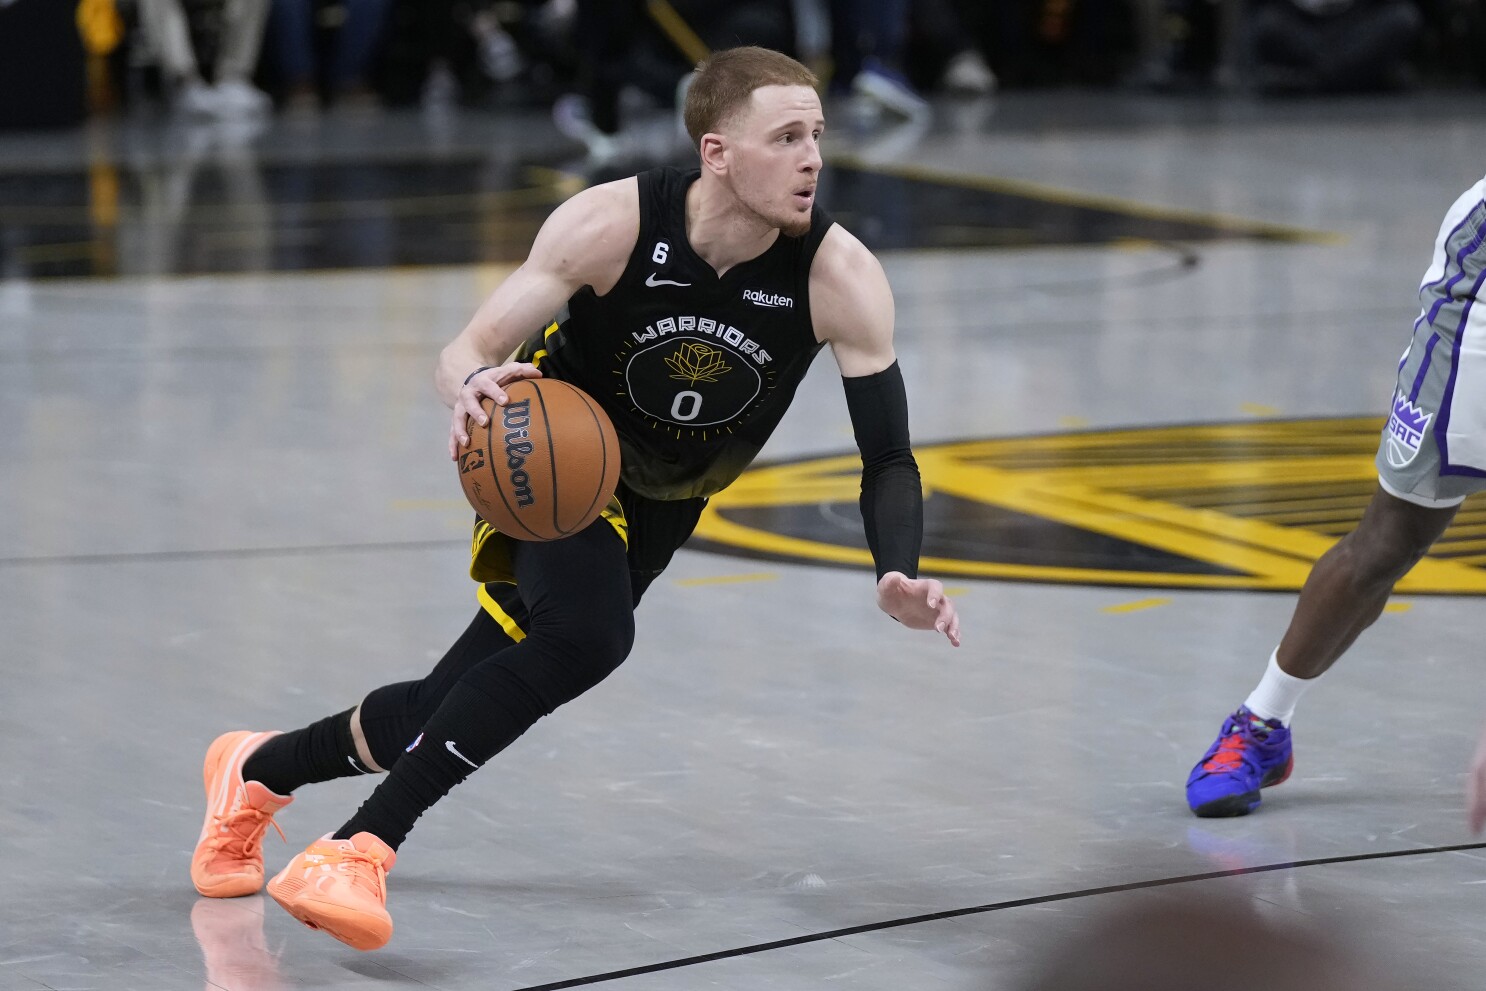 One-on-one with the Milwaukee Bucks' Donte DiVincenzo: 'I can